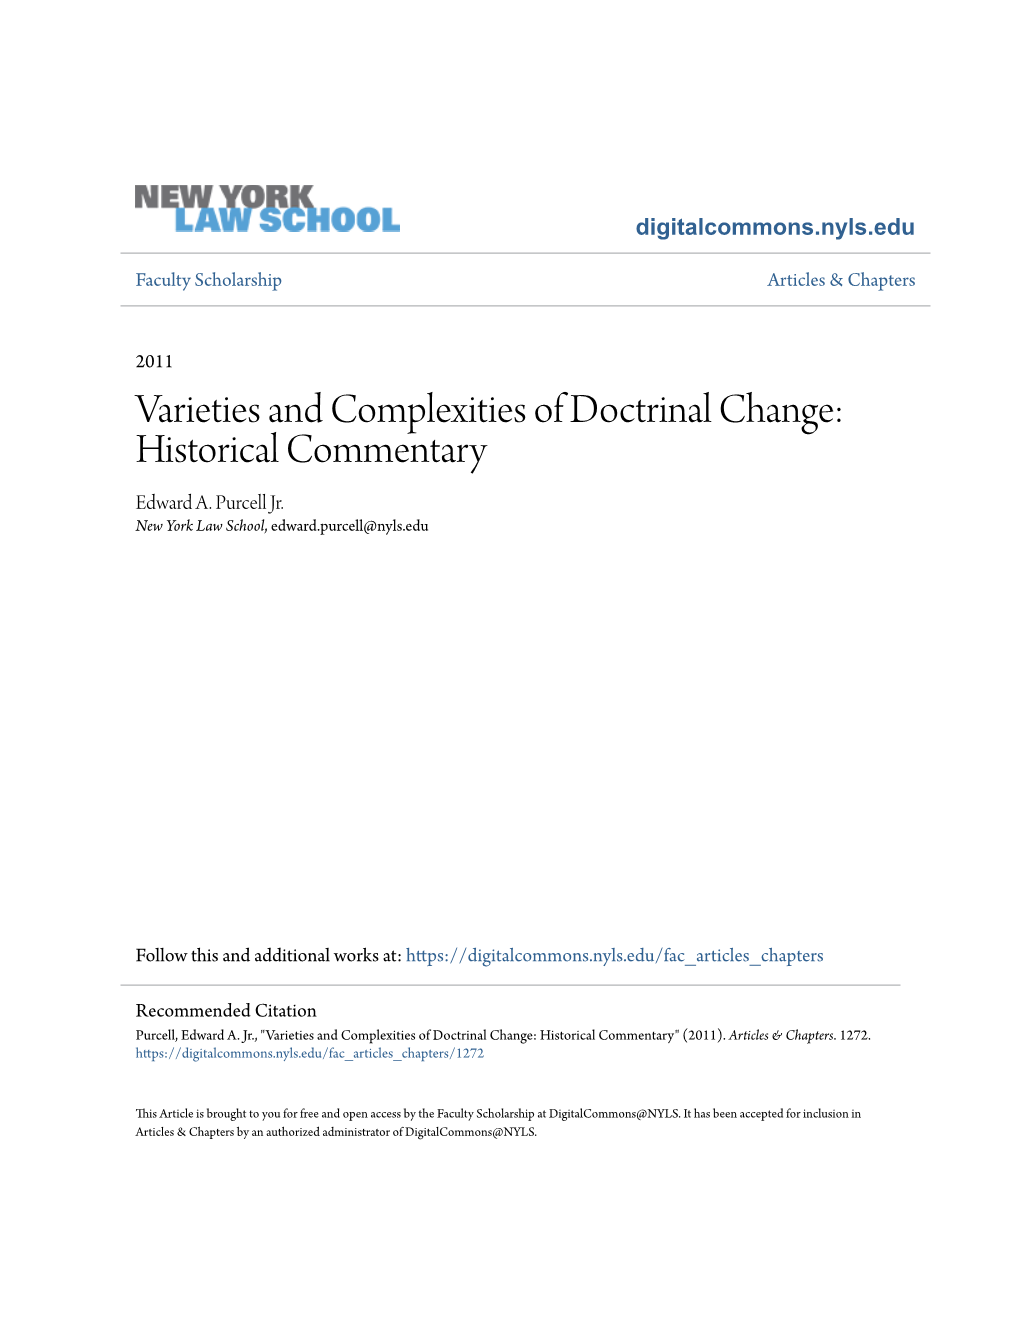 Varieties and Complexities of Doctrinal Change: Historical Commentary Edward A